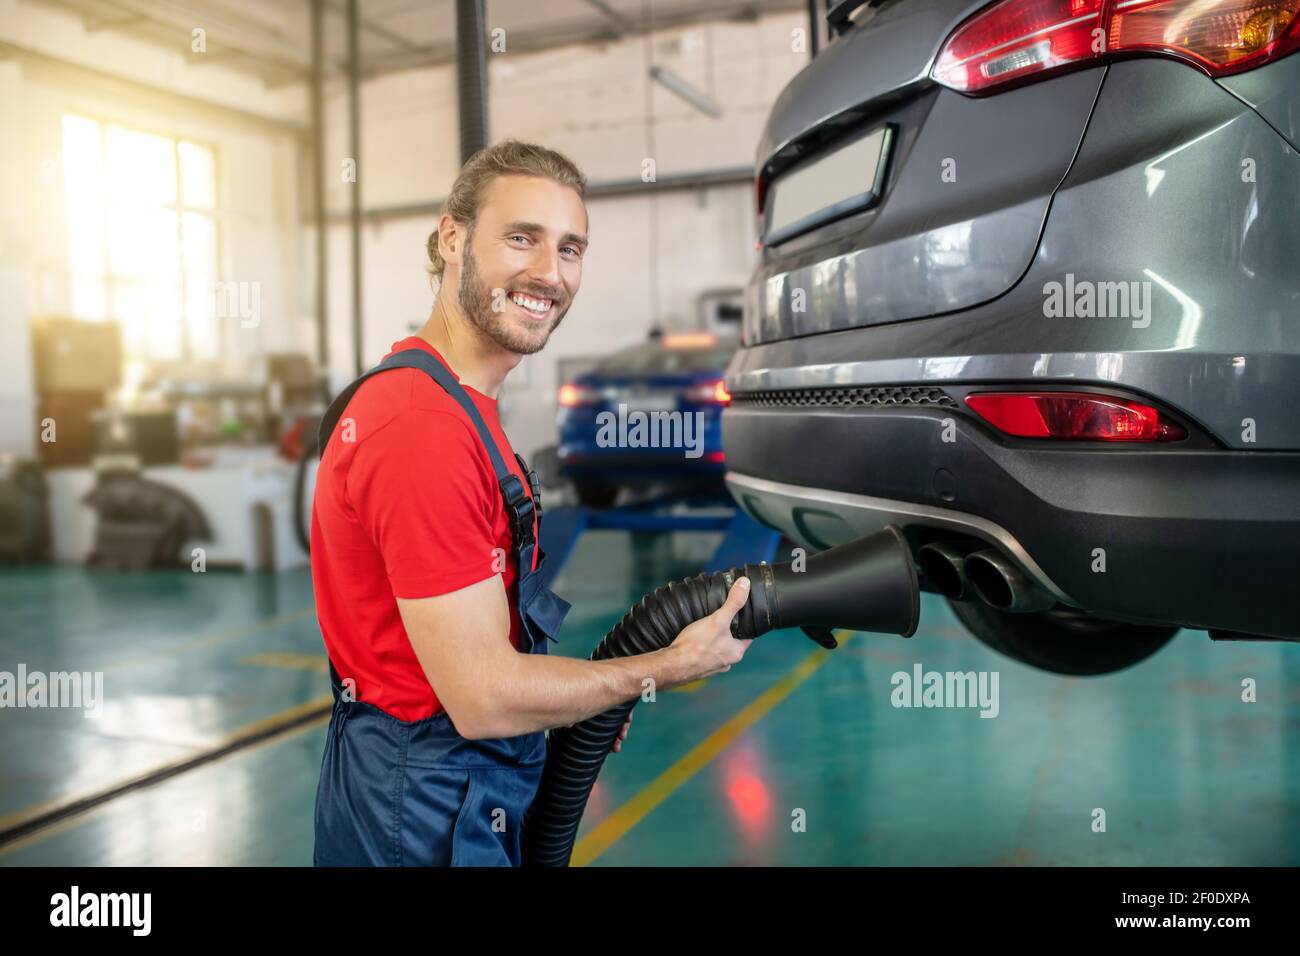 Smiling man with hose near exhaust pipe of auto Stock Photo